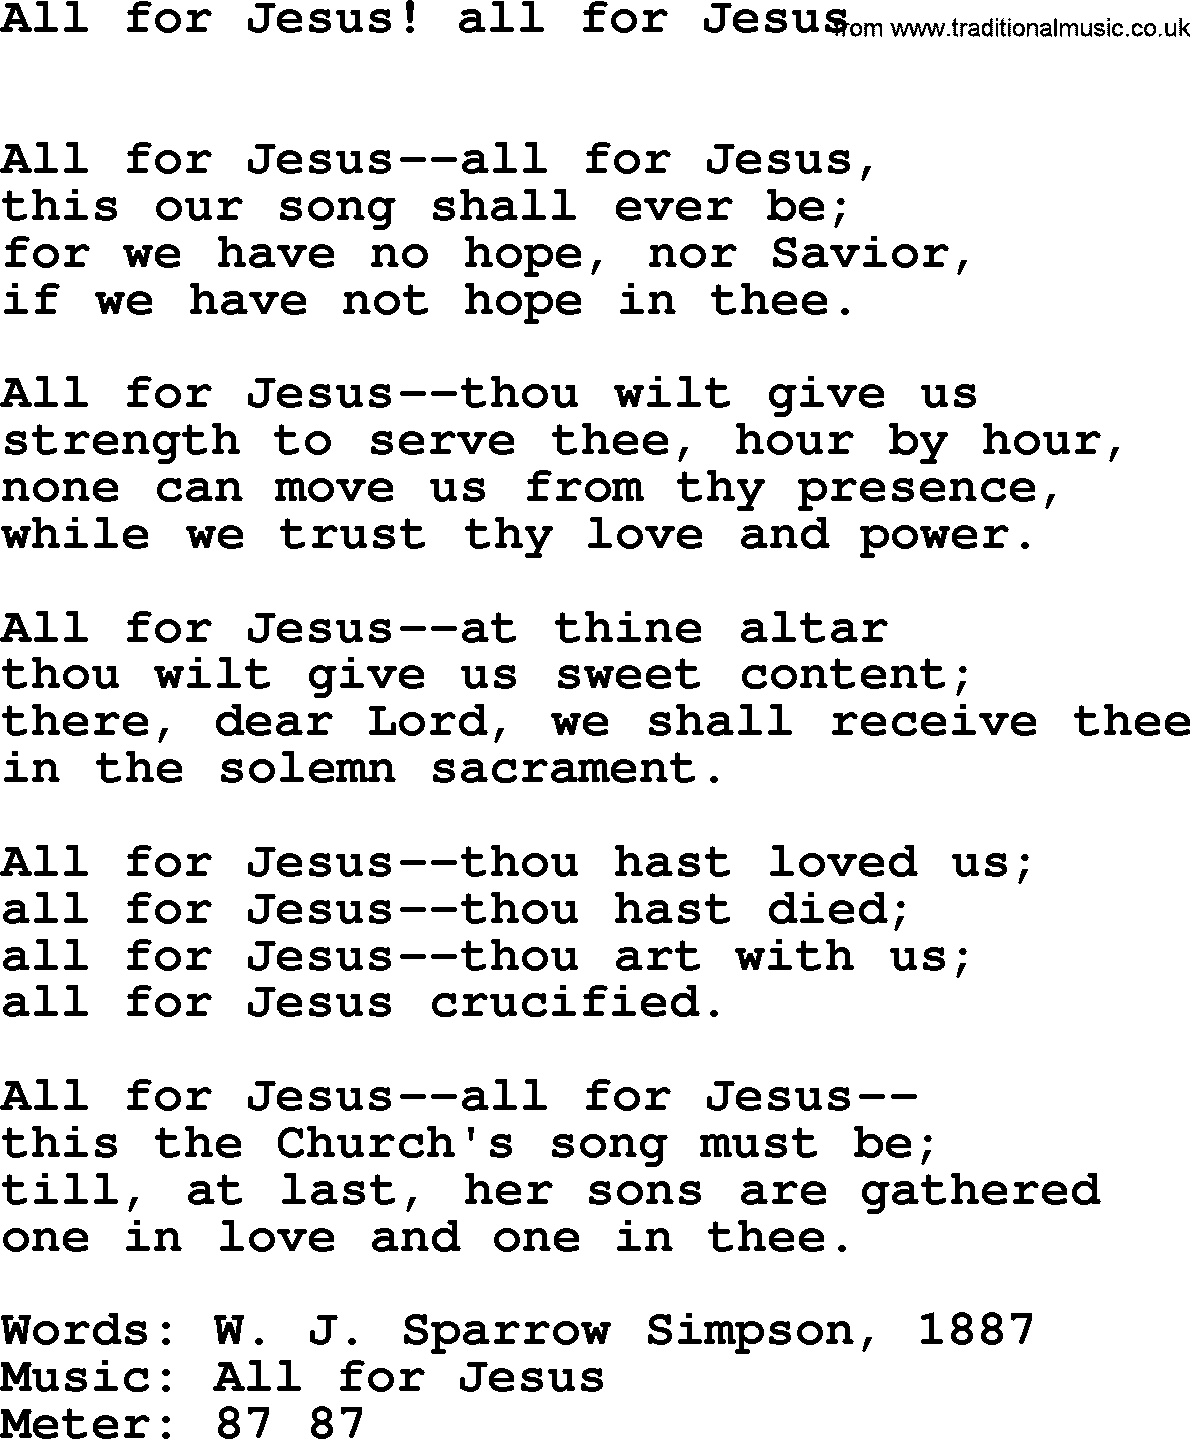 Book of Common Praise Hymn: All For Jesus! All For Jesus.txt lyrics with midi music